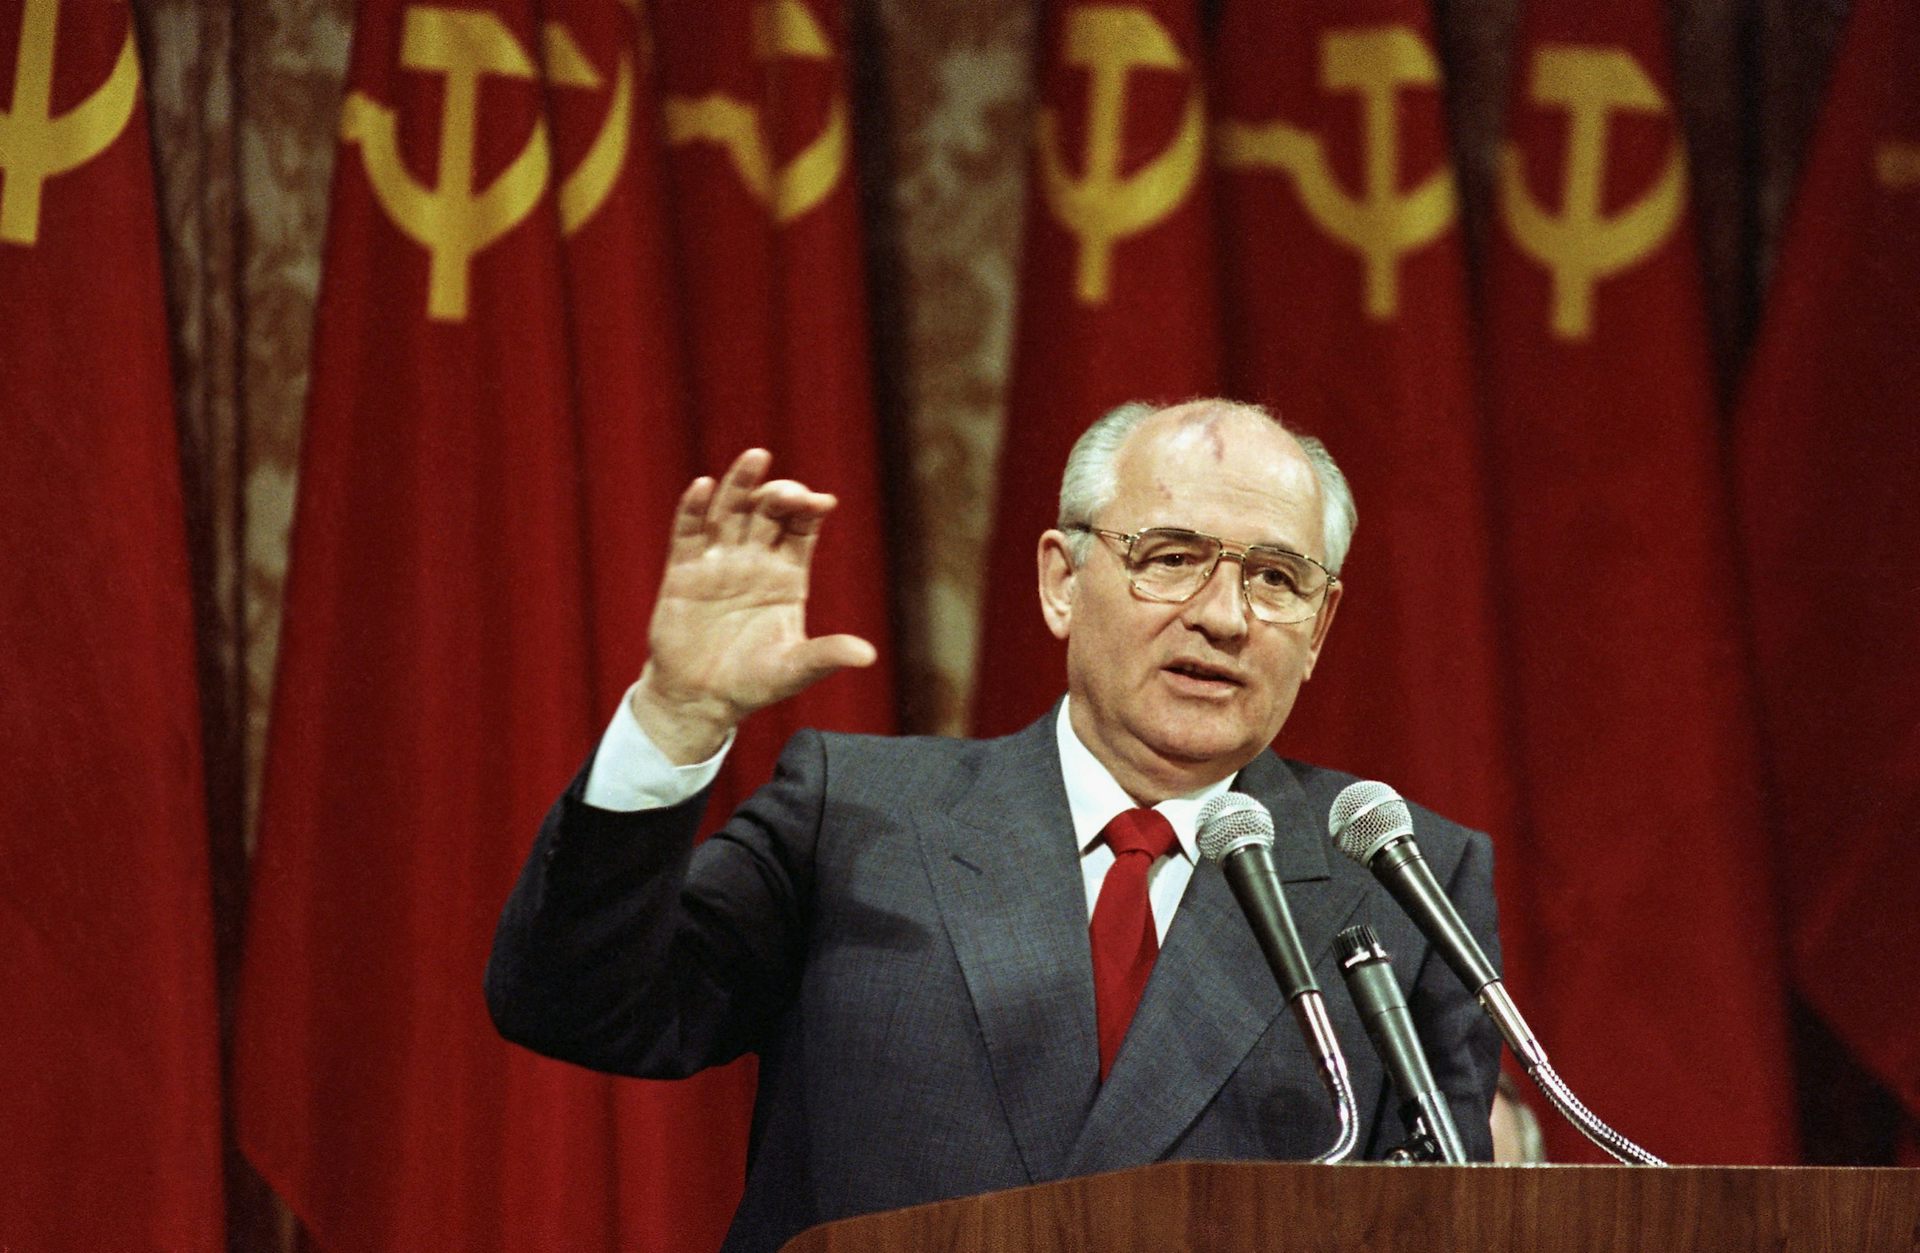 Gorbachev remembered: Respected in the West, detested in Russia